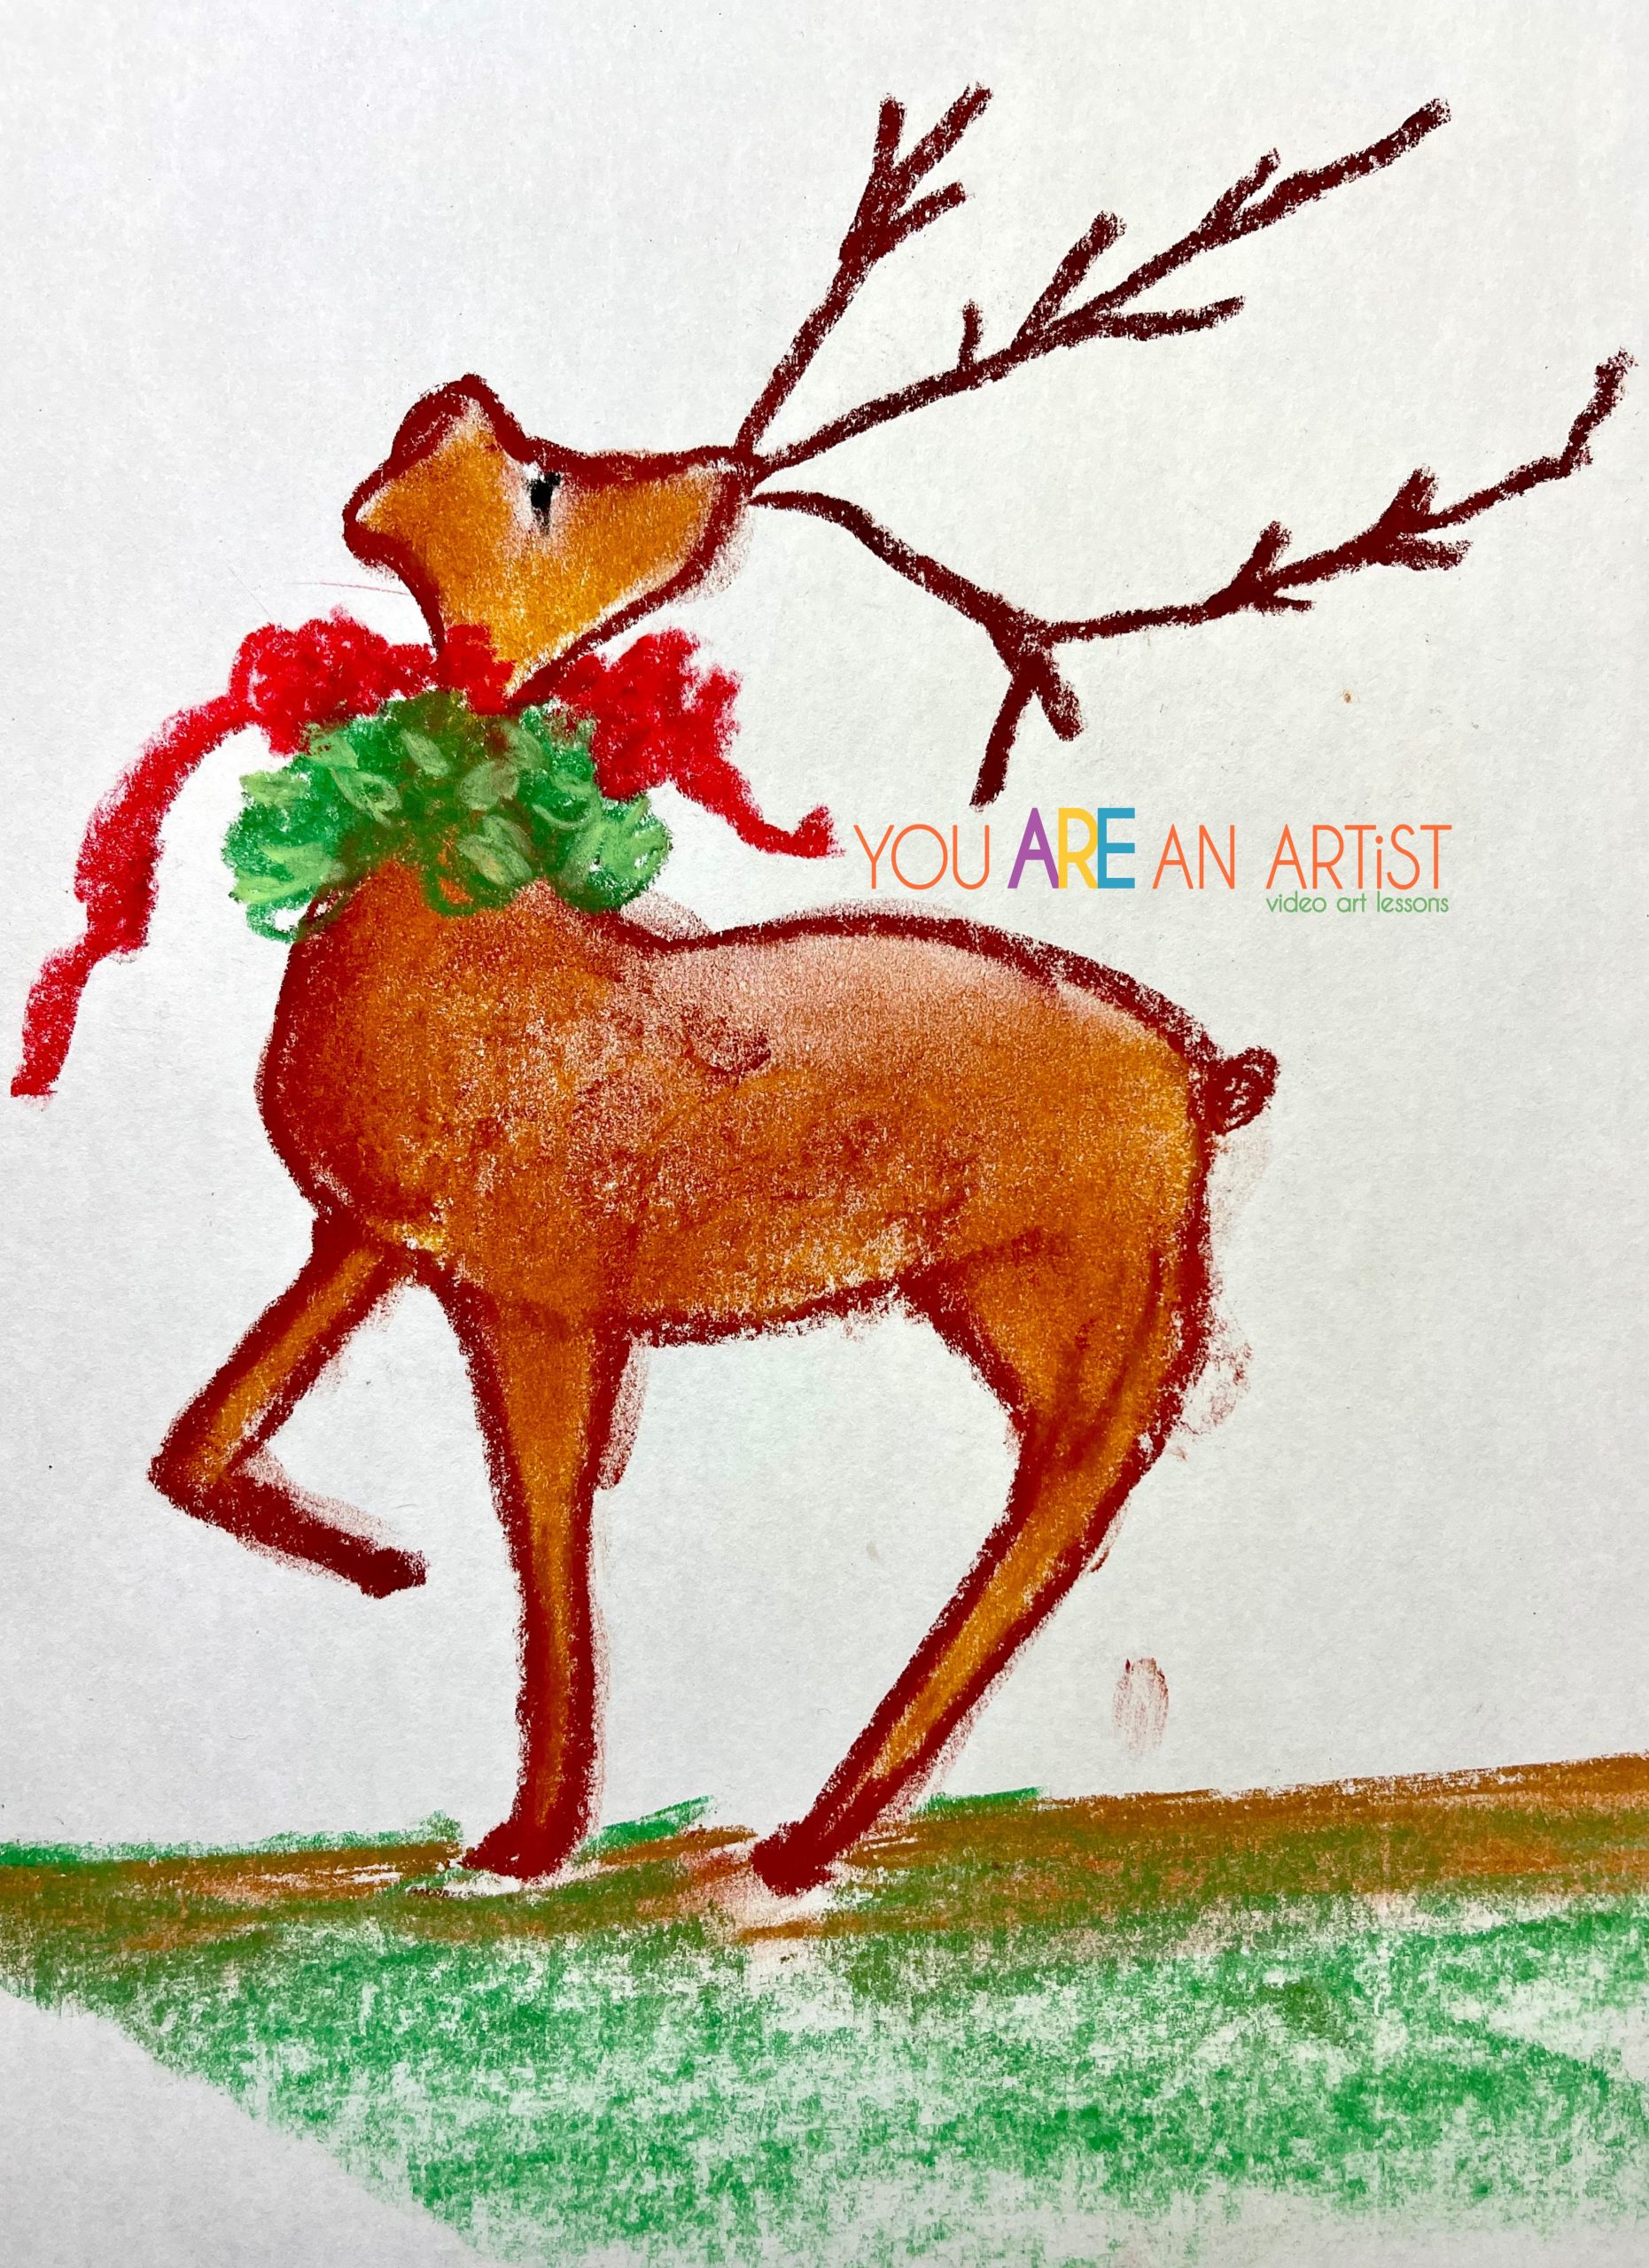 These December art activities have everything you need for holiday homeschooling. Includes online lessons and extension activities.